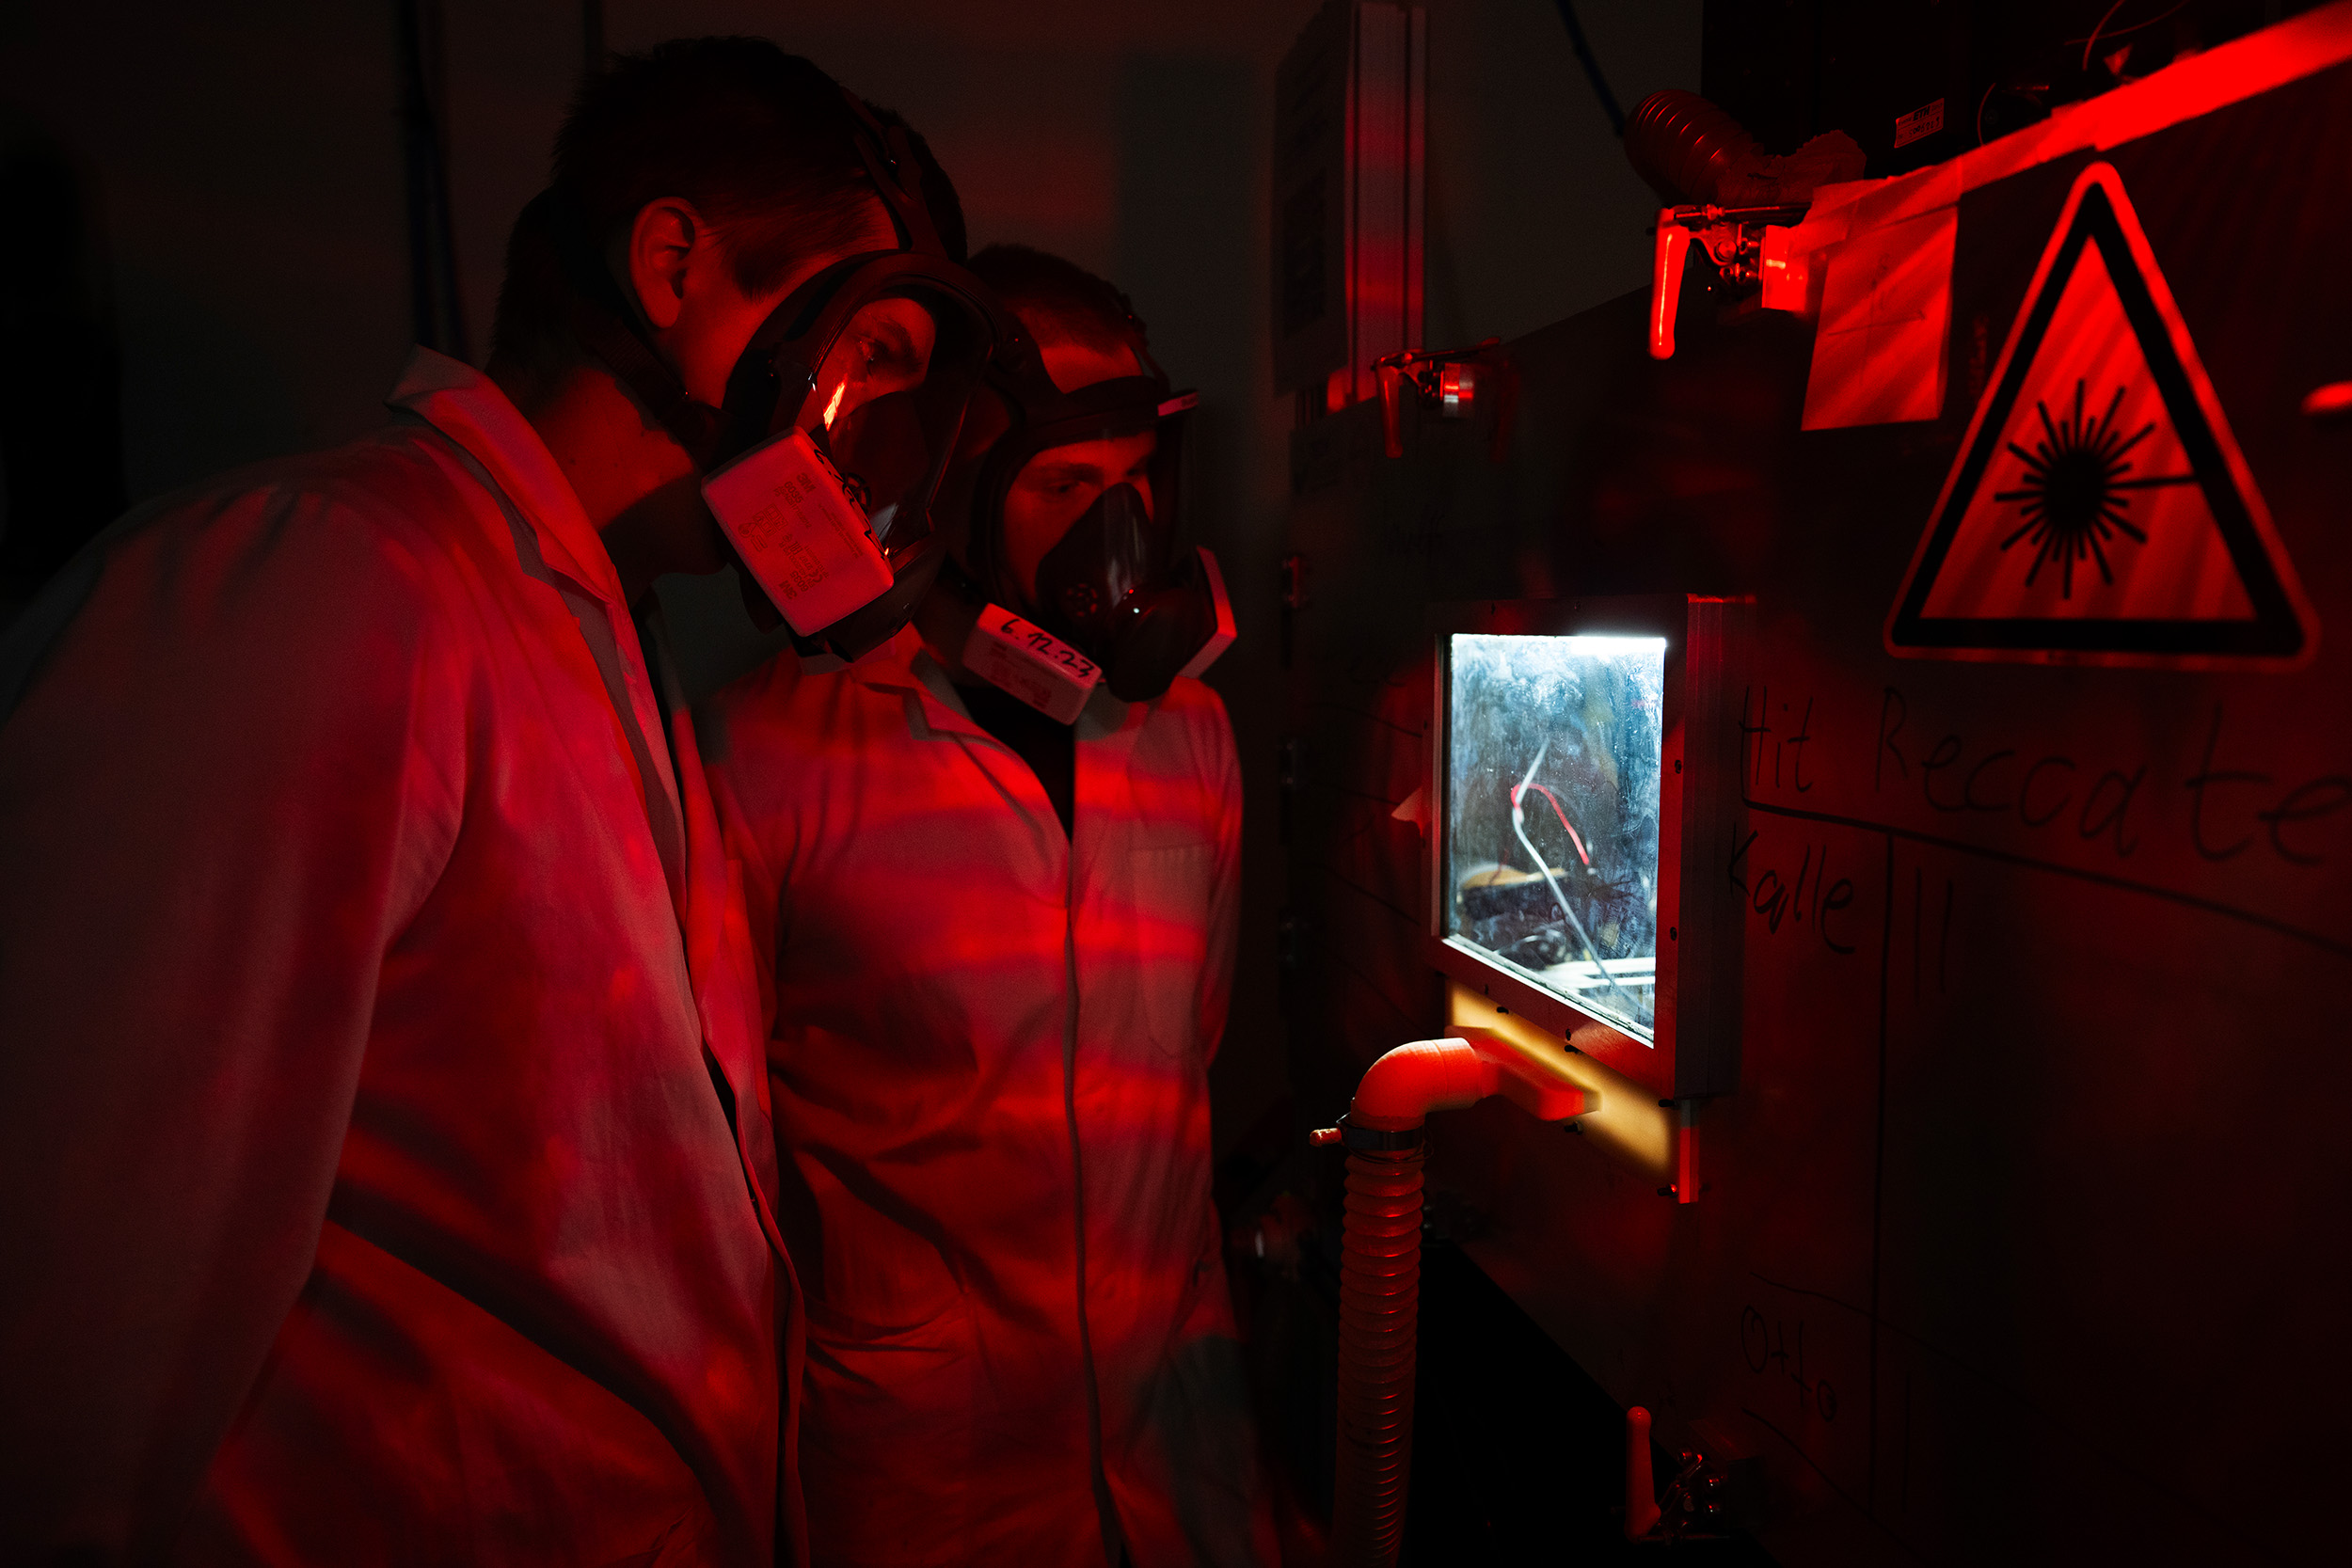 Students with gas masks in a dark room with infrared light.